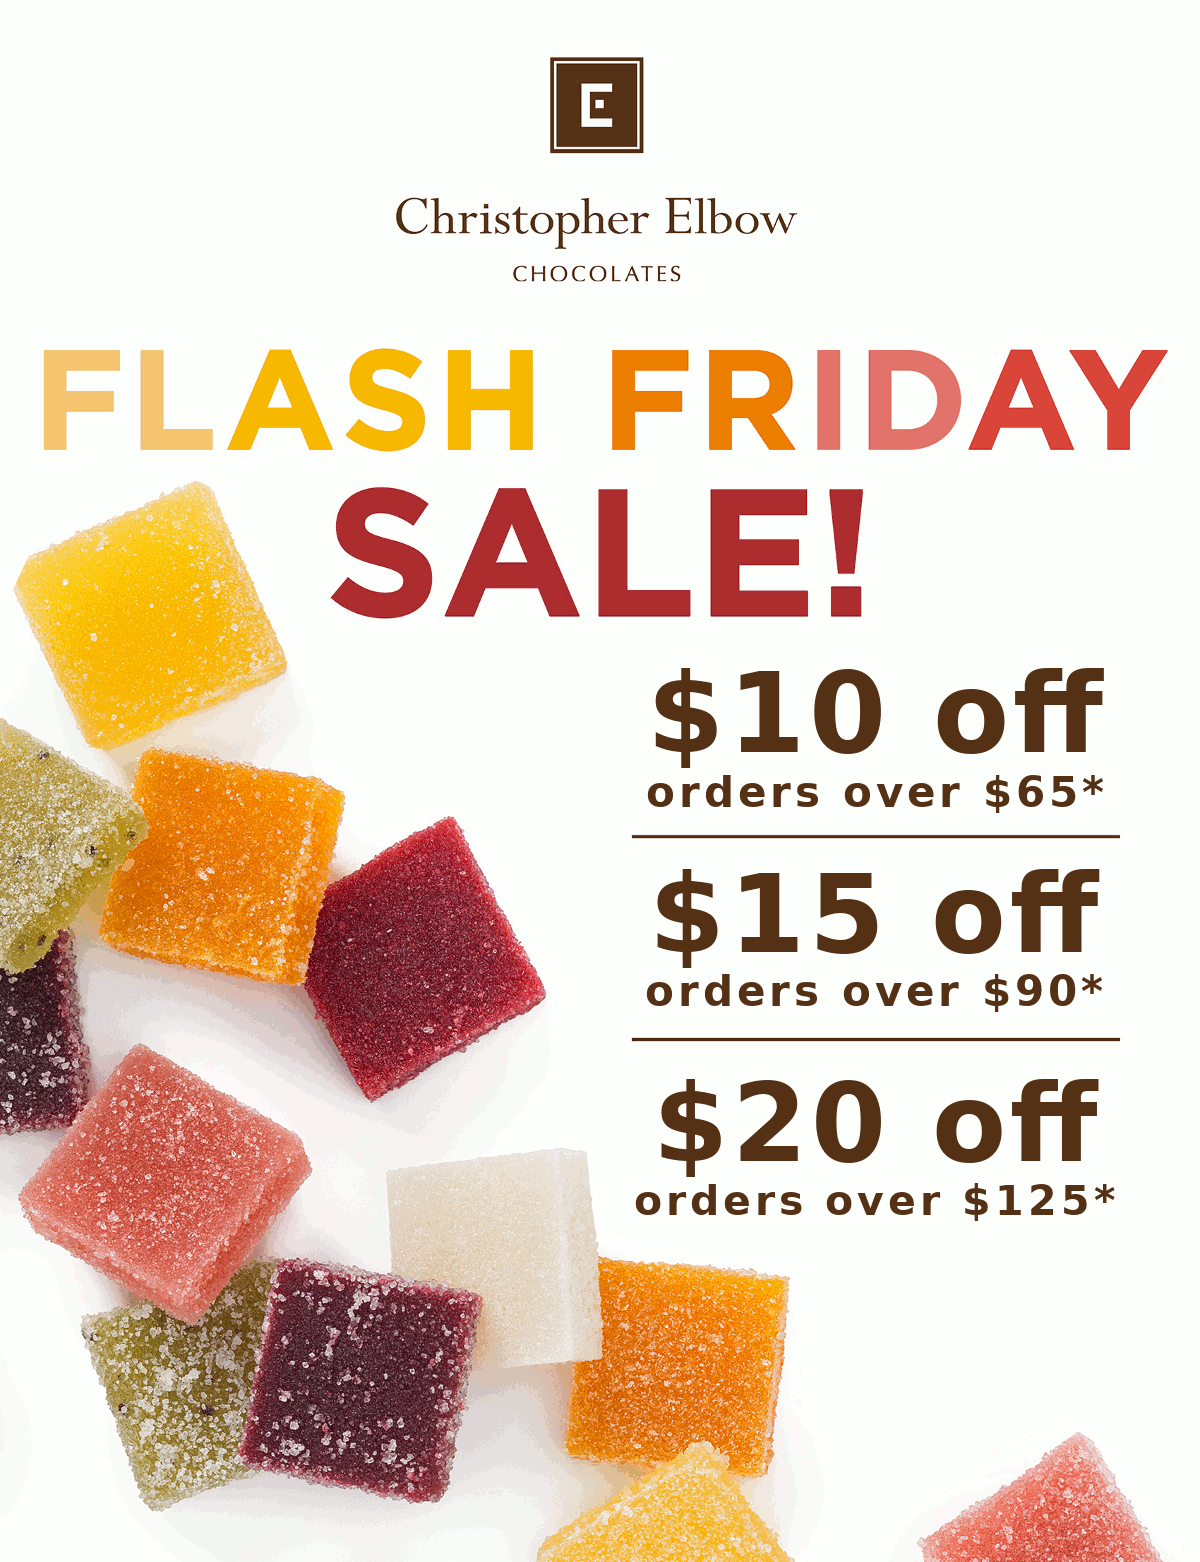 Flash Friday Sale - Save $10, $15, or $20